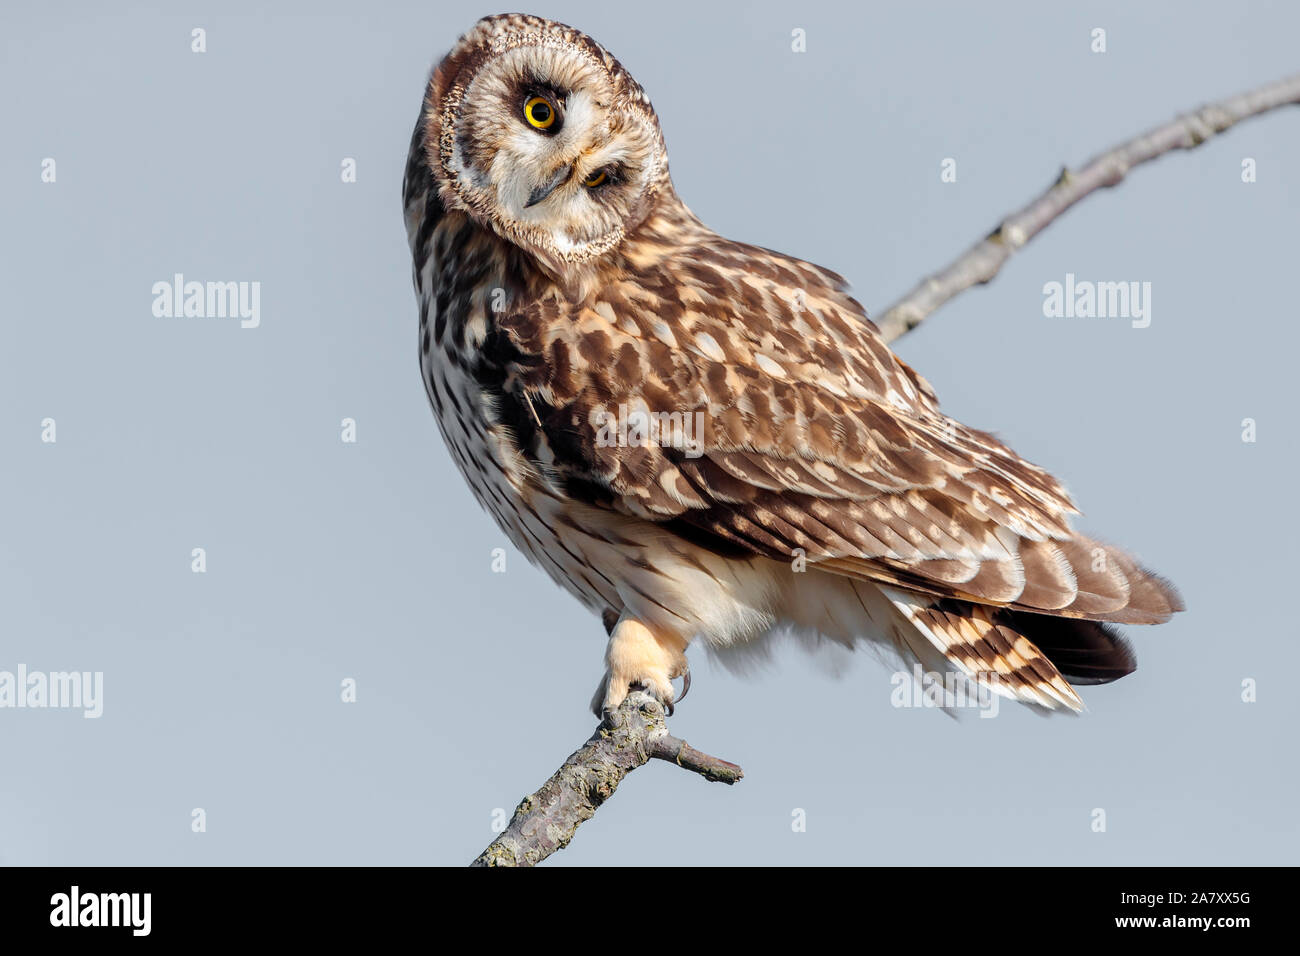 Cute Short eared posing for the camera with long eye lashes and cute face under the winter sun and clear skies Stock Photo